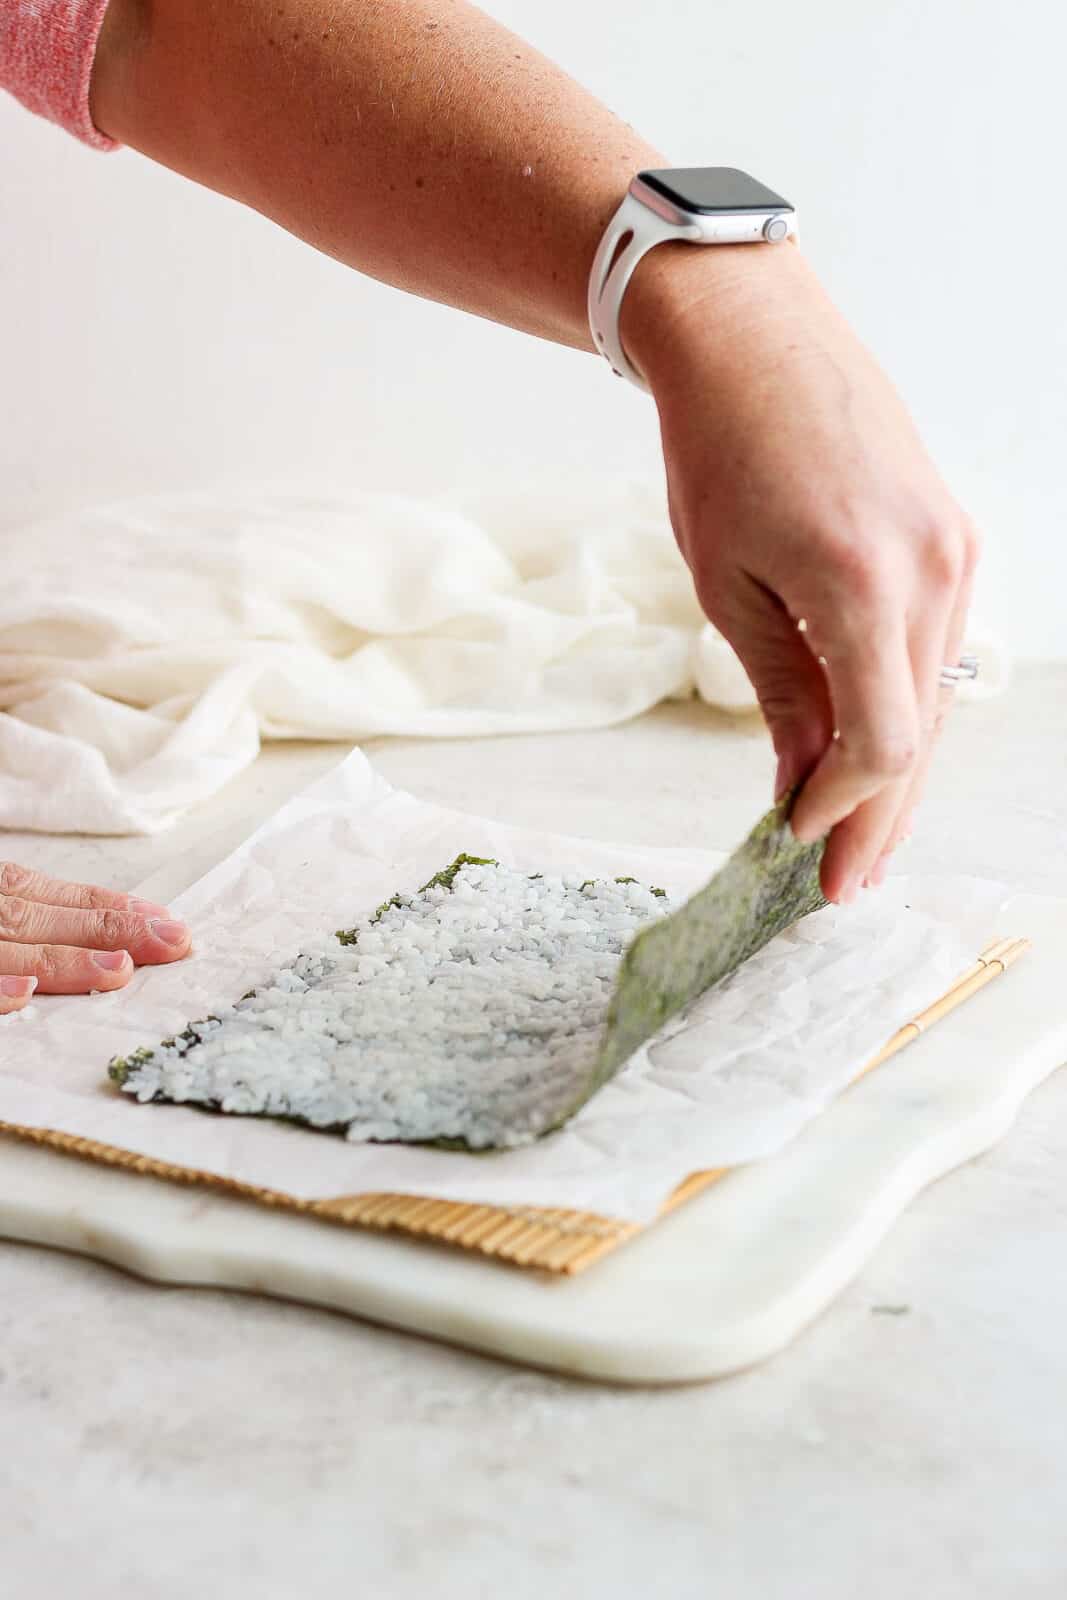 A hand lifting the top of the nori sheet to begin flipping it over.